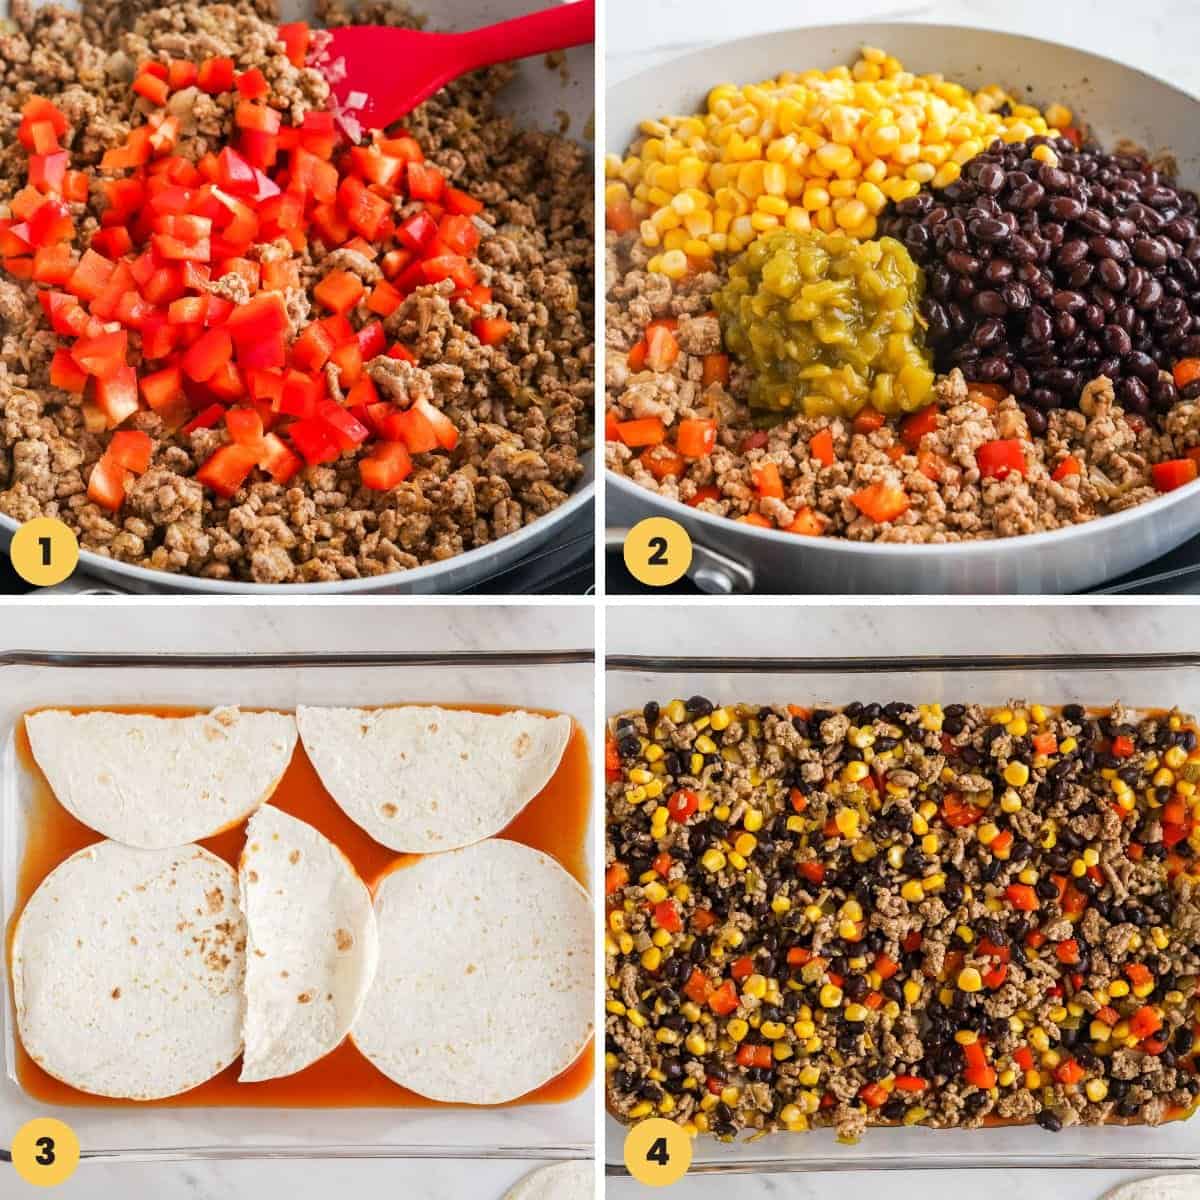 four images showing the steps for making and layering beef enchilada casserole.